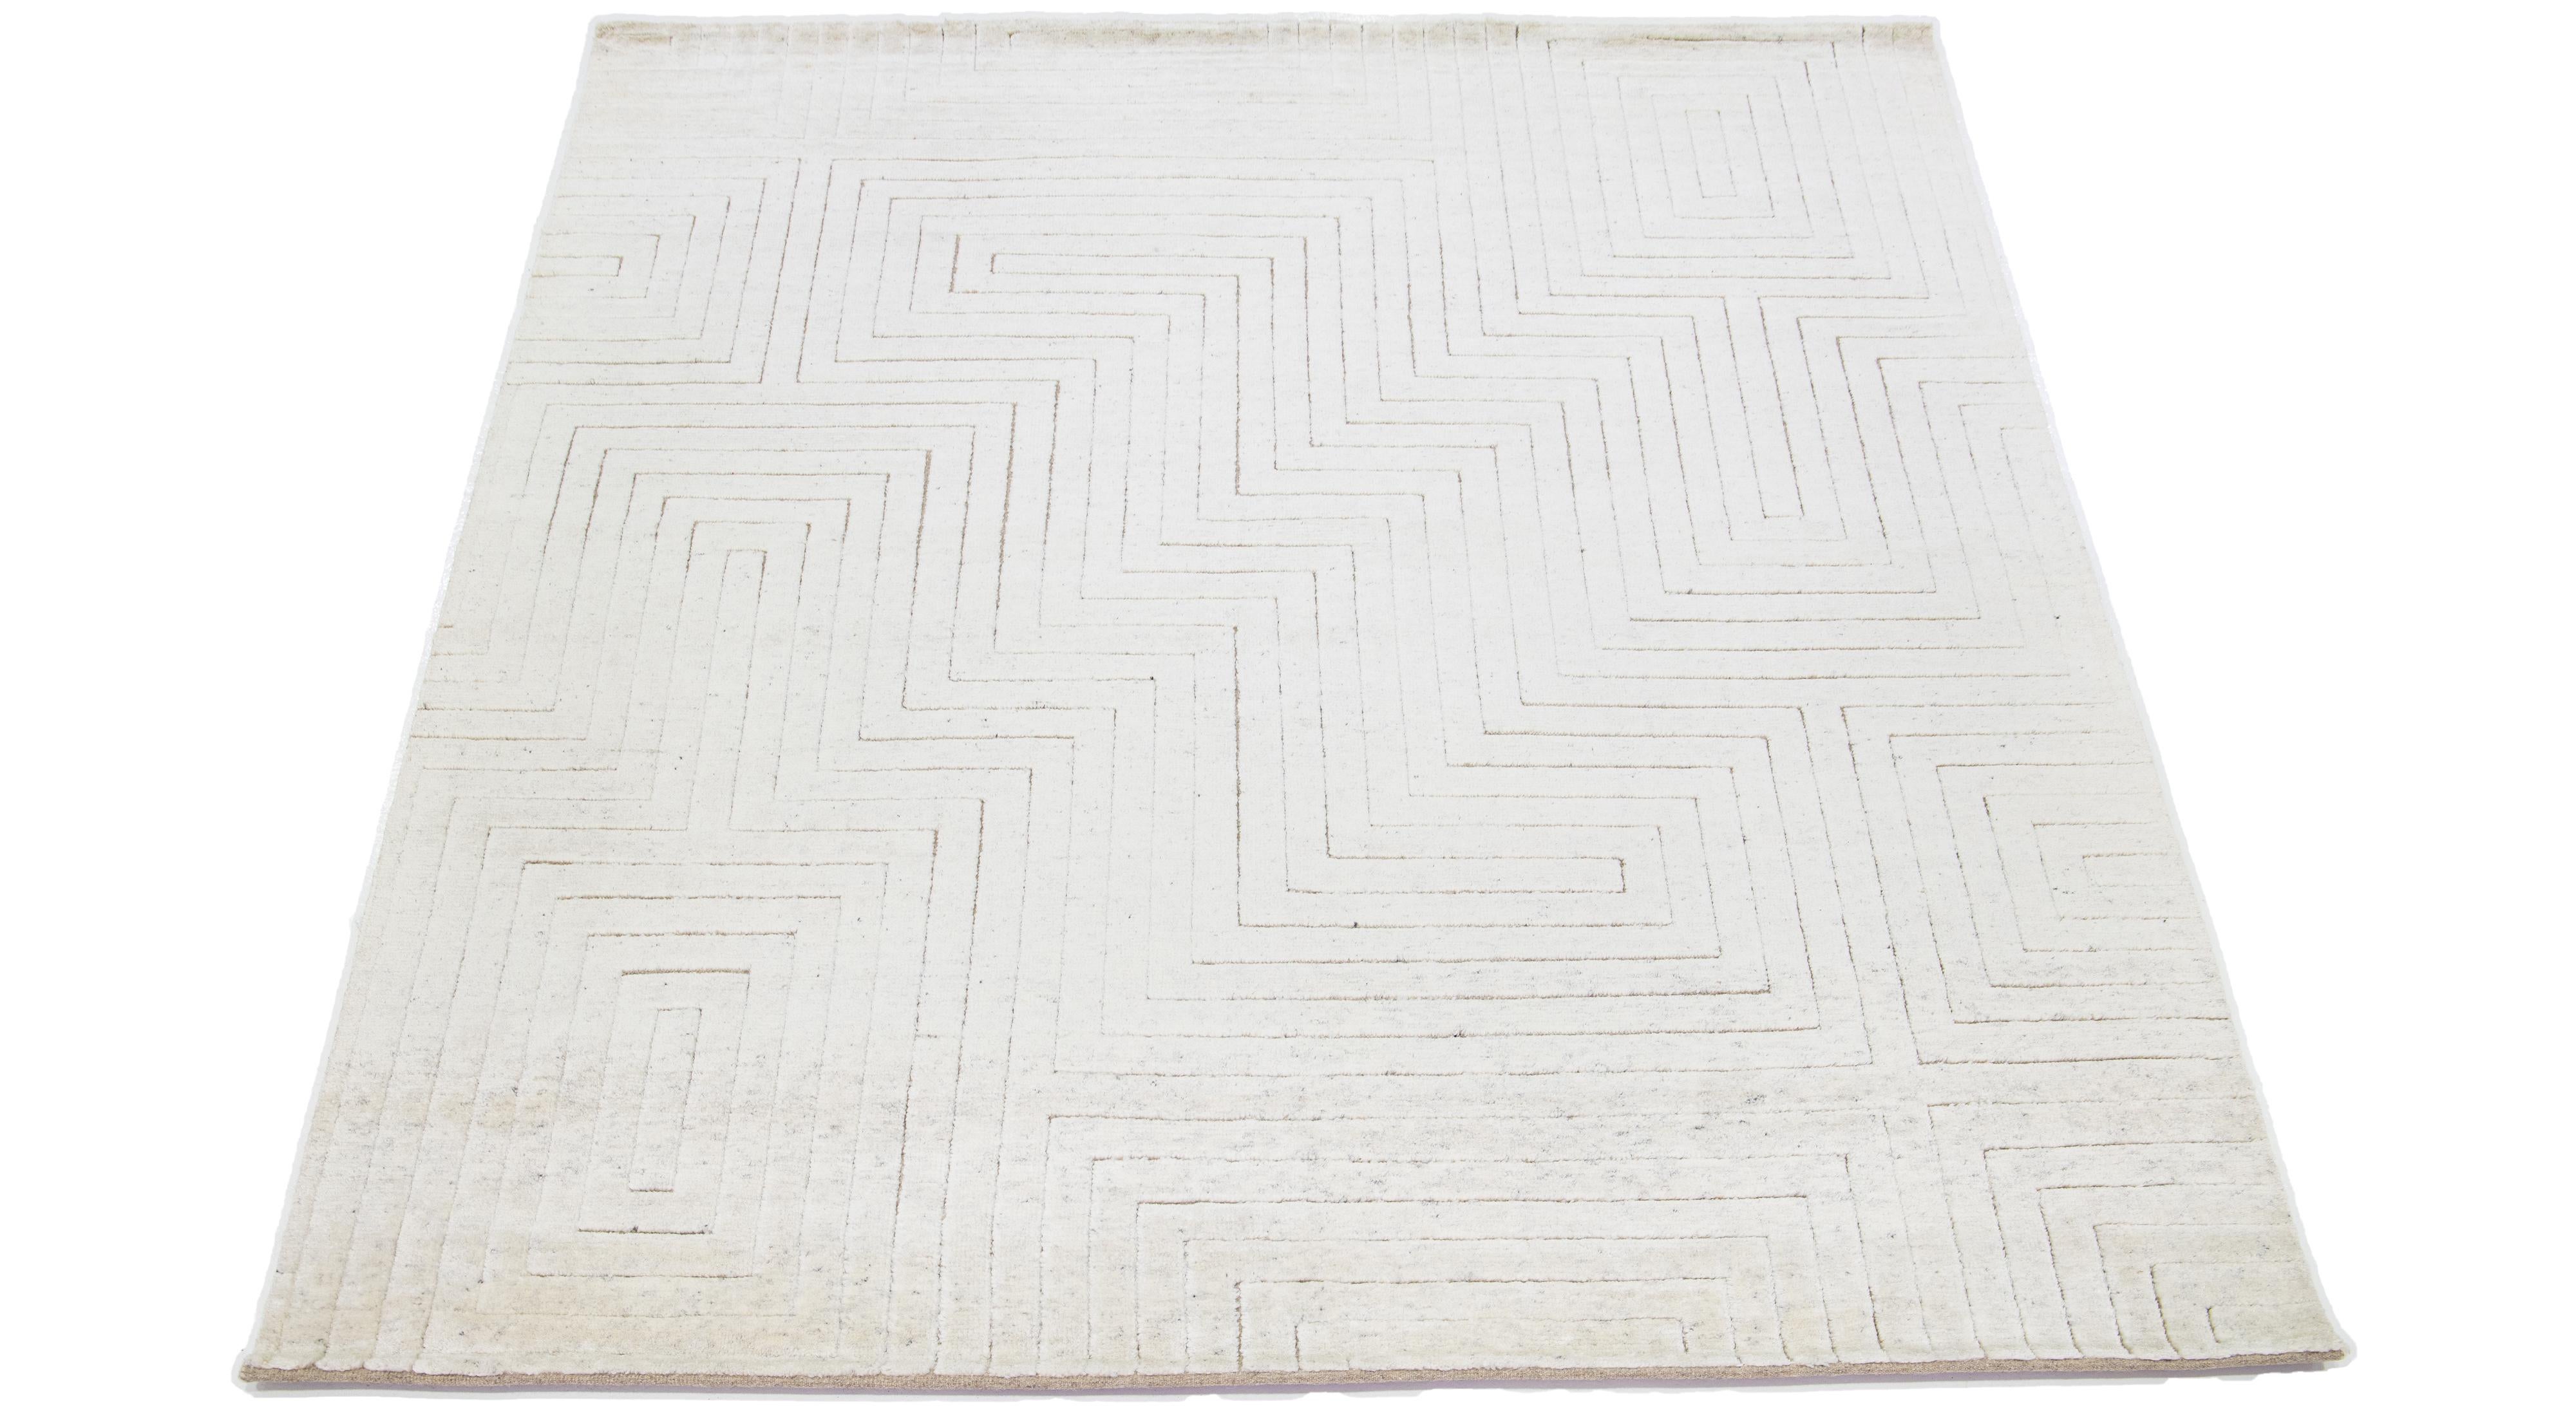 Featuring a contemporary Moroccan-inspired design, this hand-knotted wool rug is accentuated by subtle ivory tones atop a striking ivory base—a stunning geometric Seamless pattern.

This rug measures 8'1